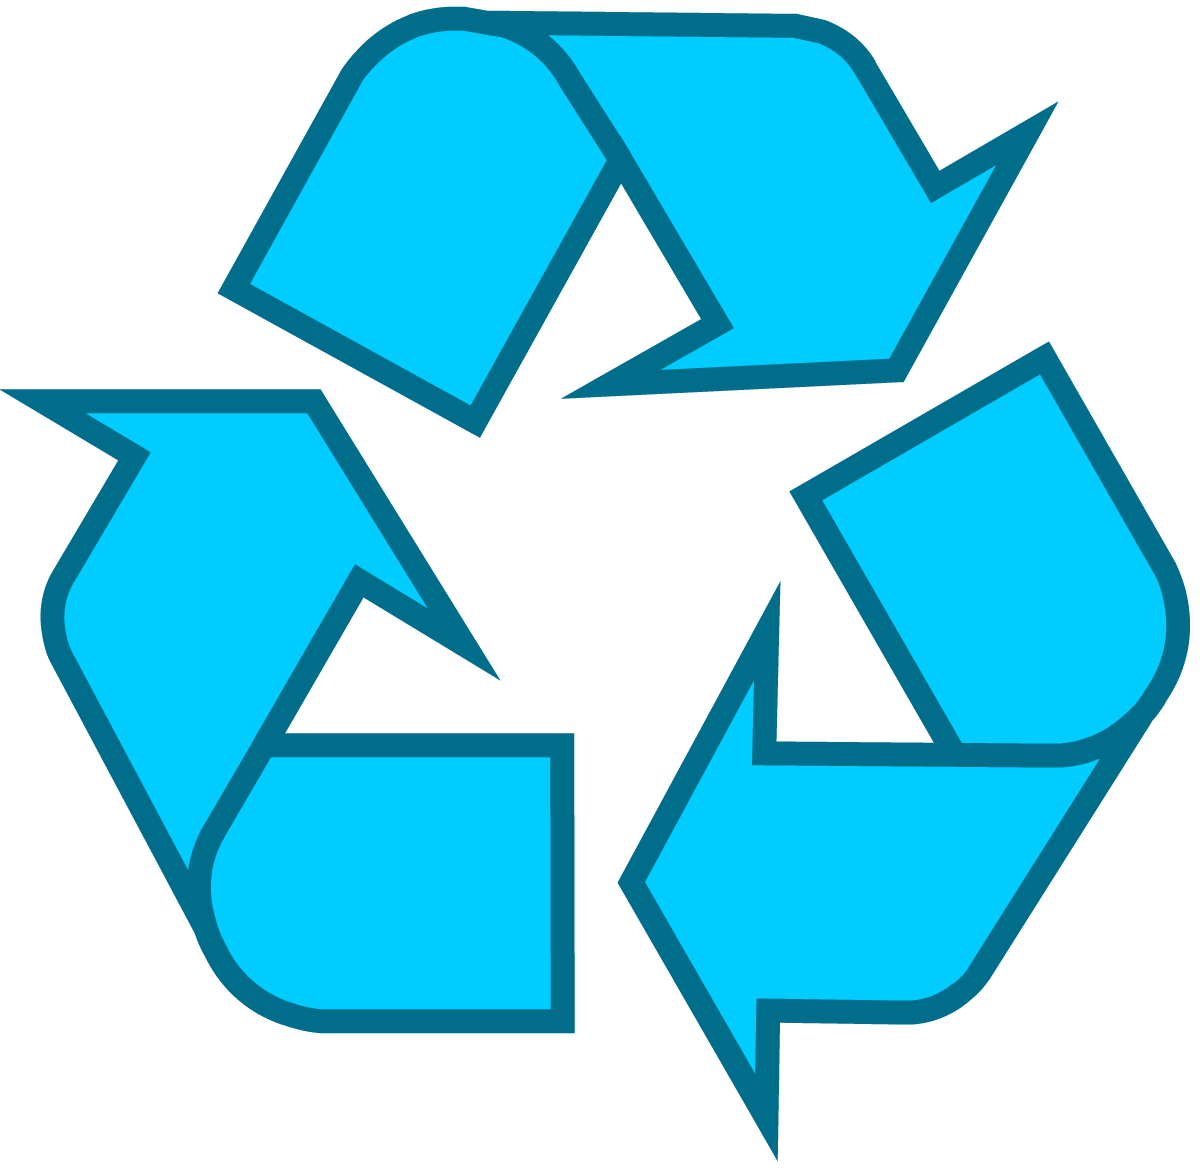 Download Recycling Symbol - The Original Recycle Logo